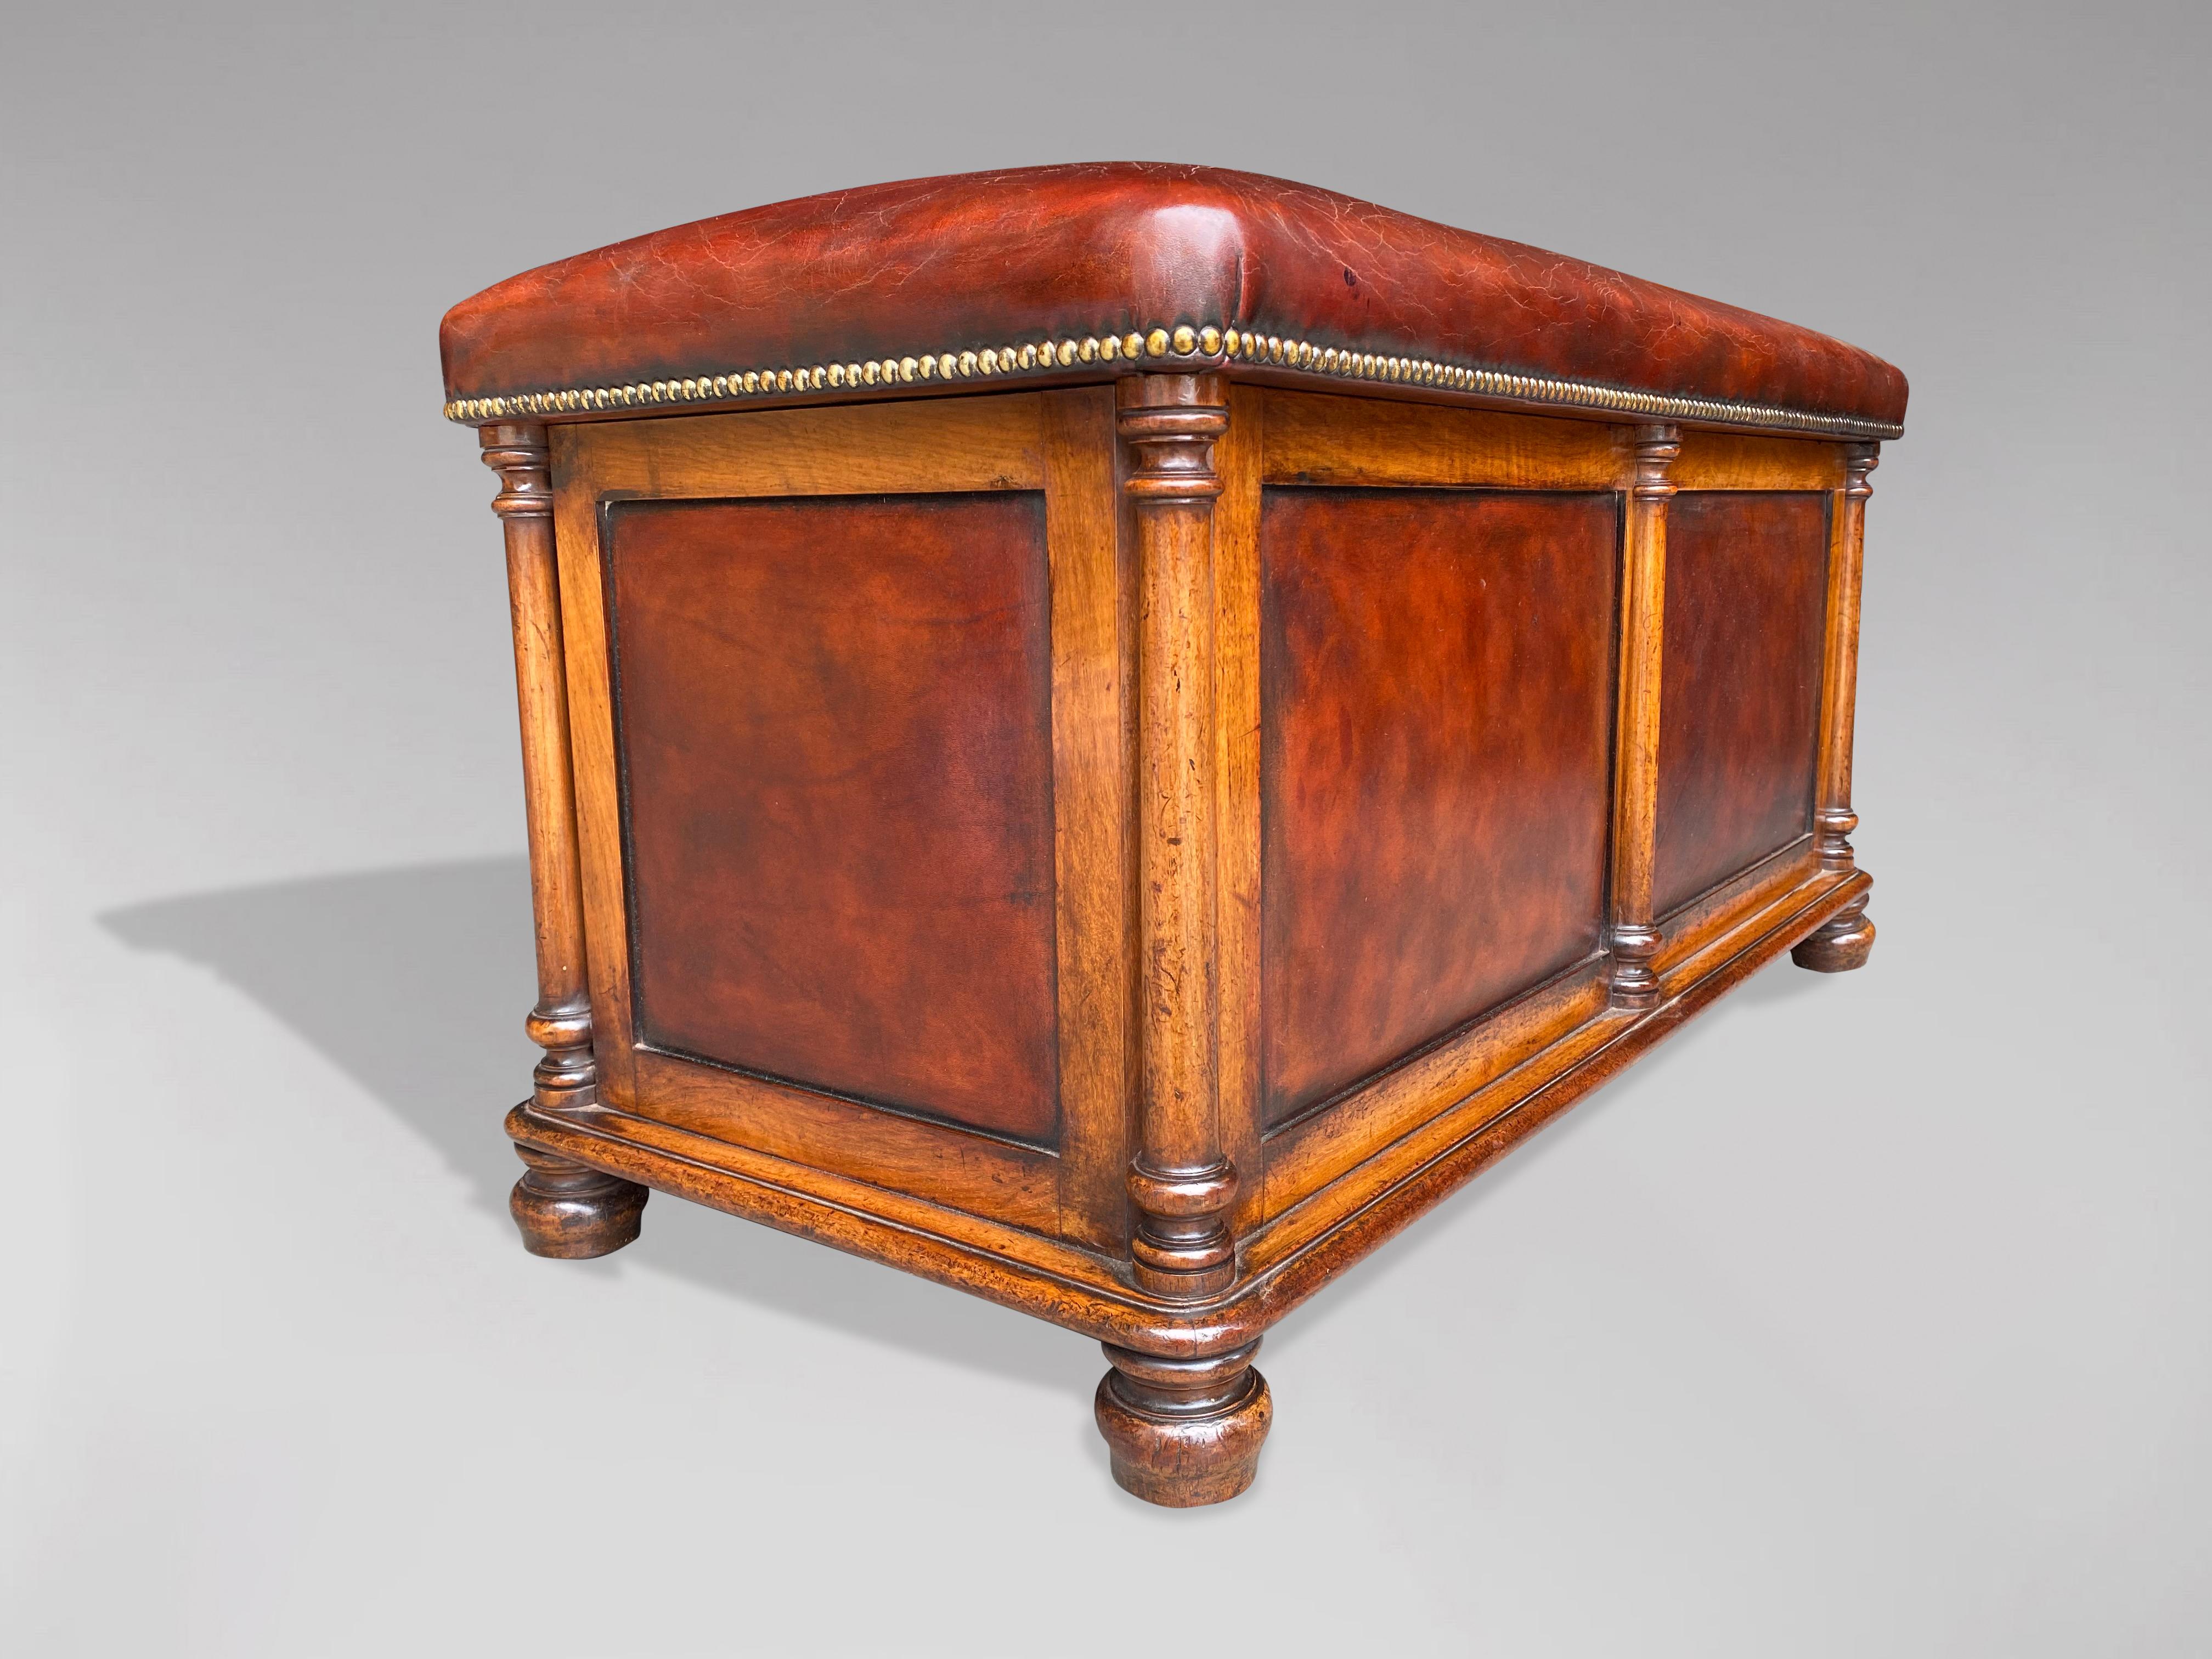 19th Century, William IV Period Walnut and Leather Ottoman In Good Condition For Sale In Petworth,West Sussex, GB